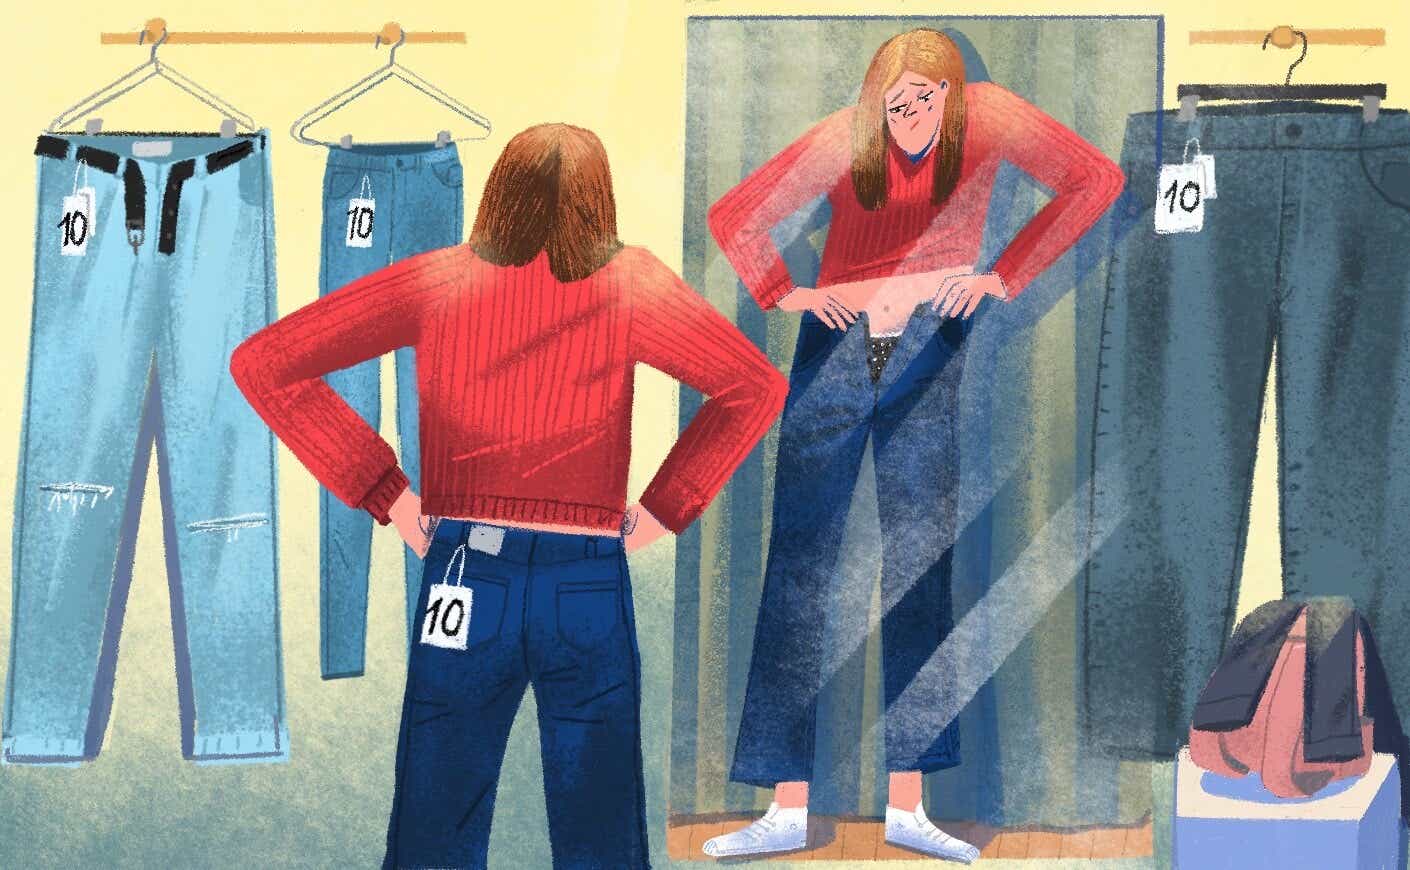 woman trying on clothing